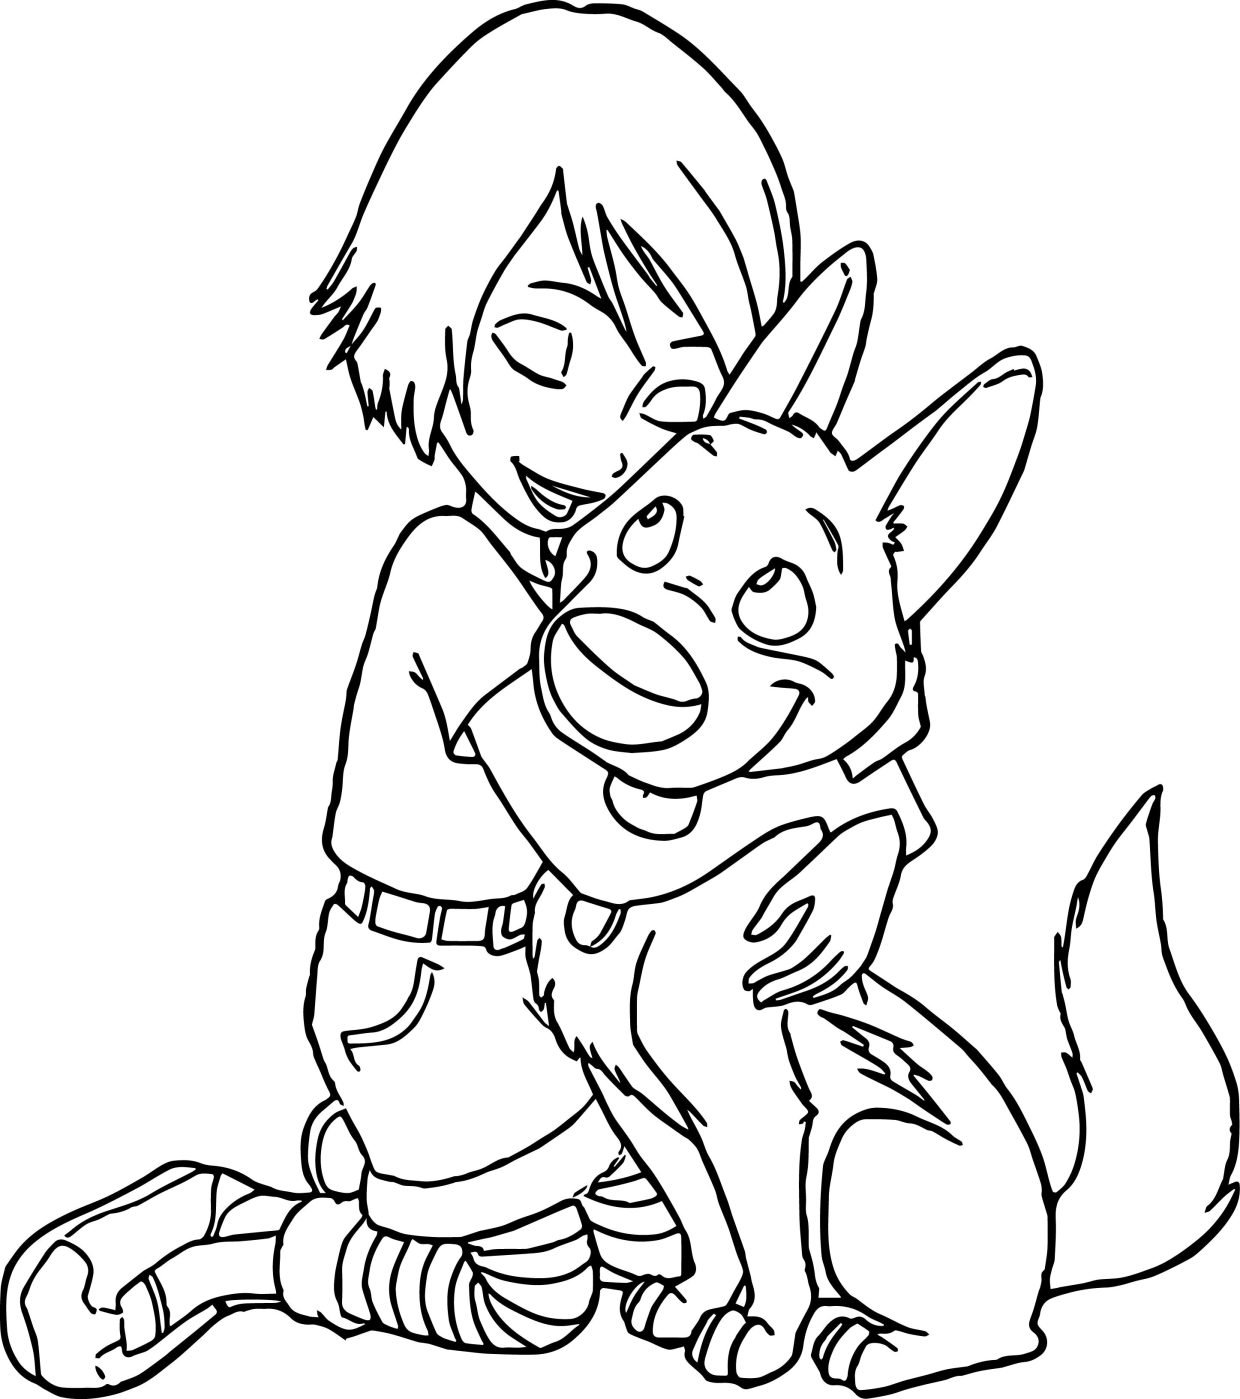 Cute Bolt and Penny Coloring Pages 6